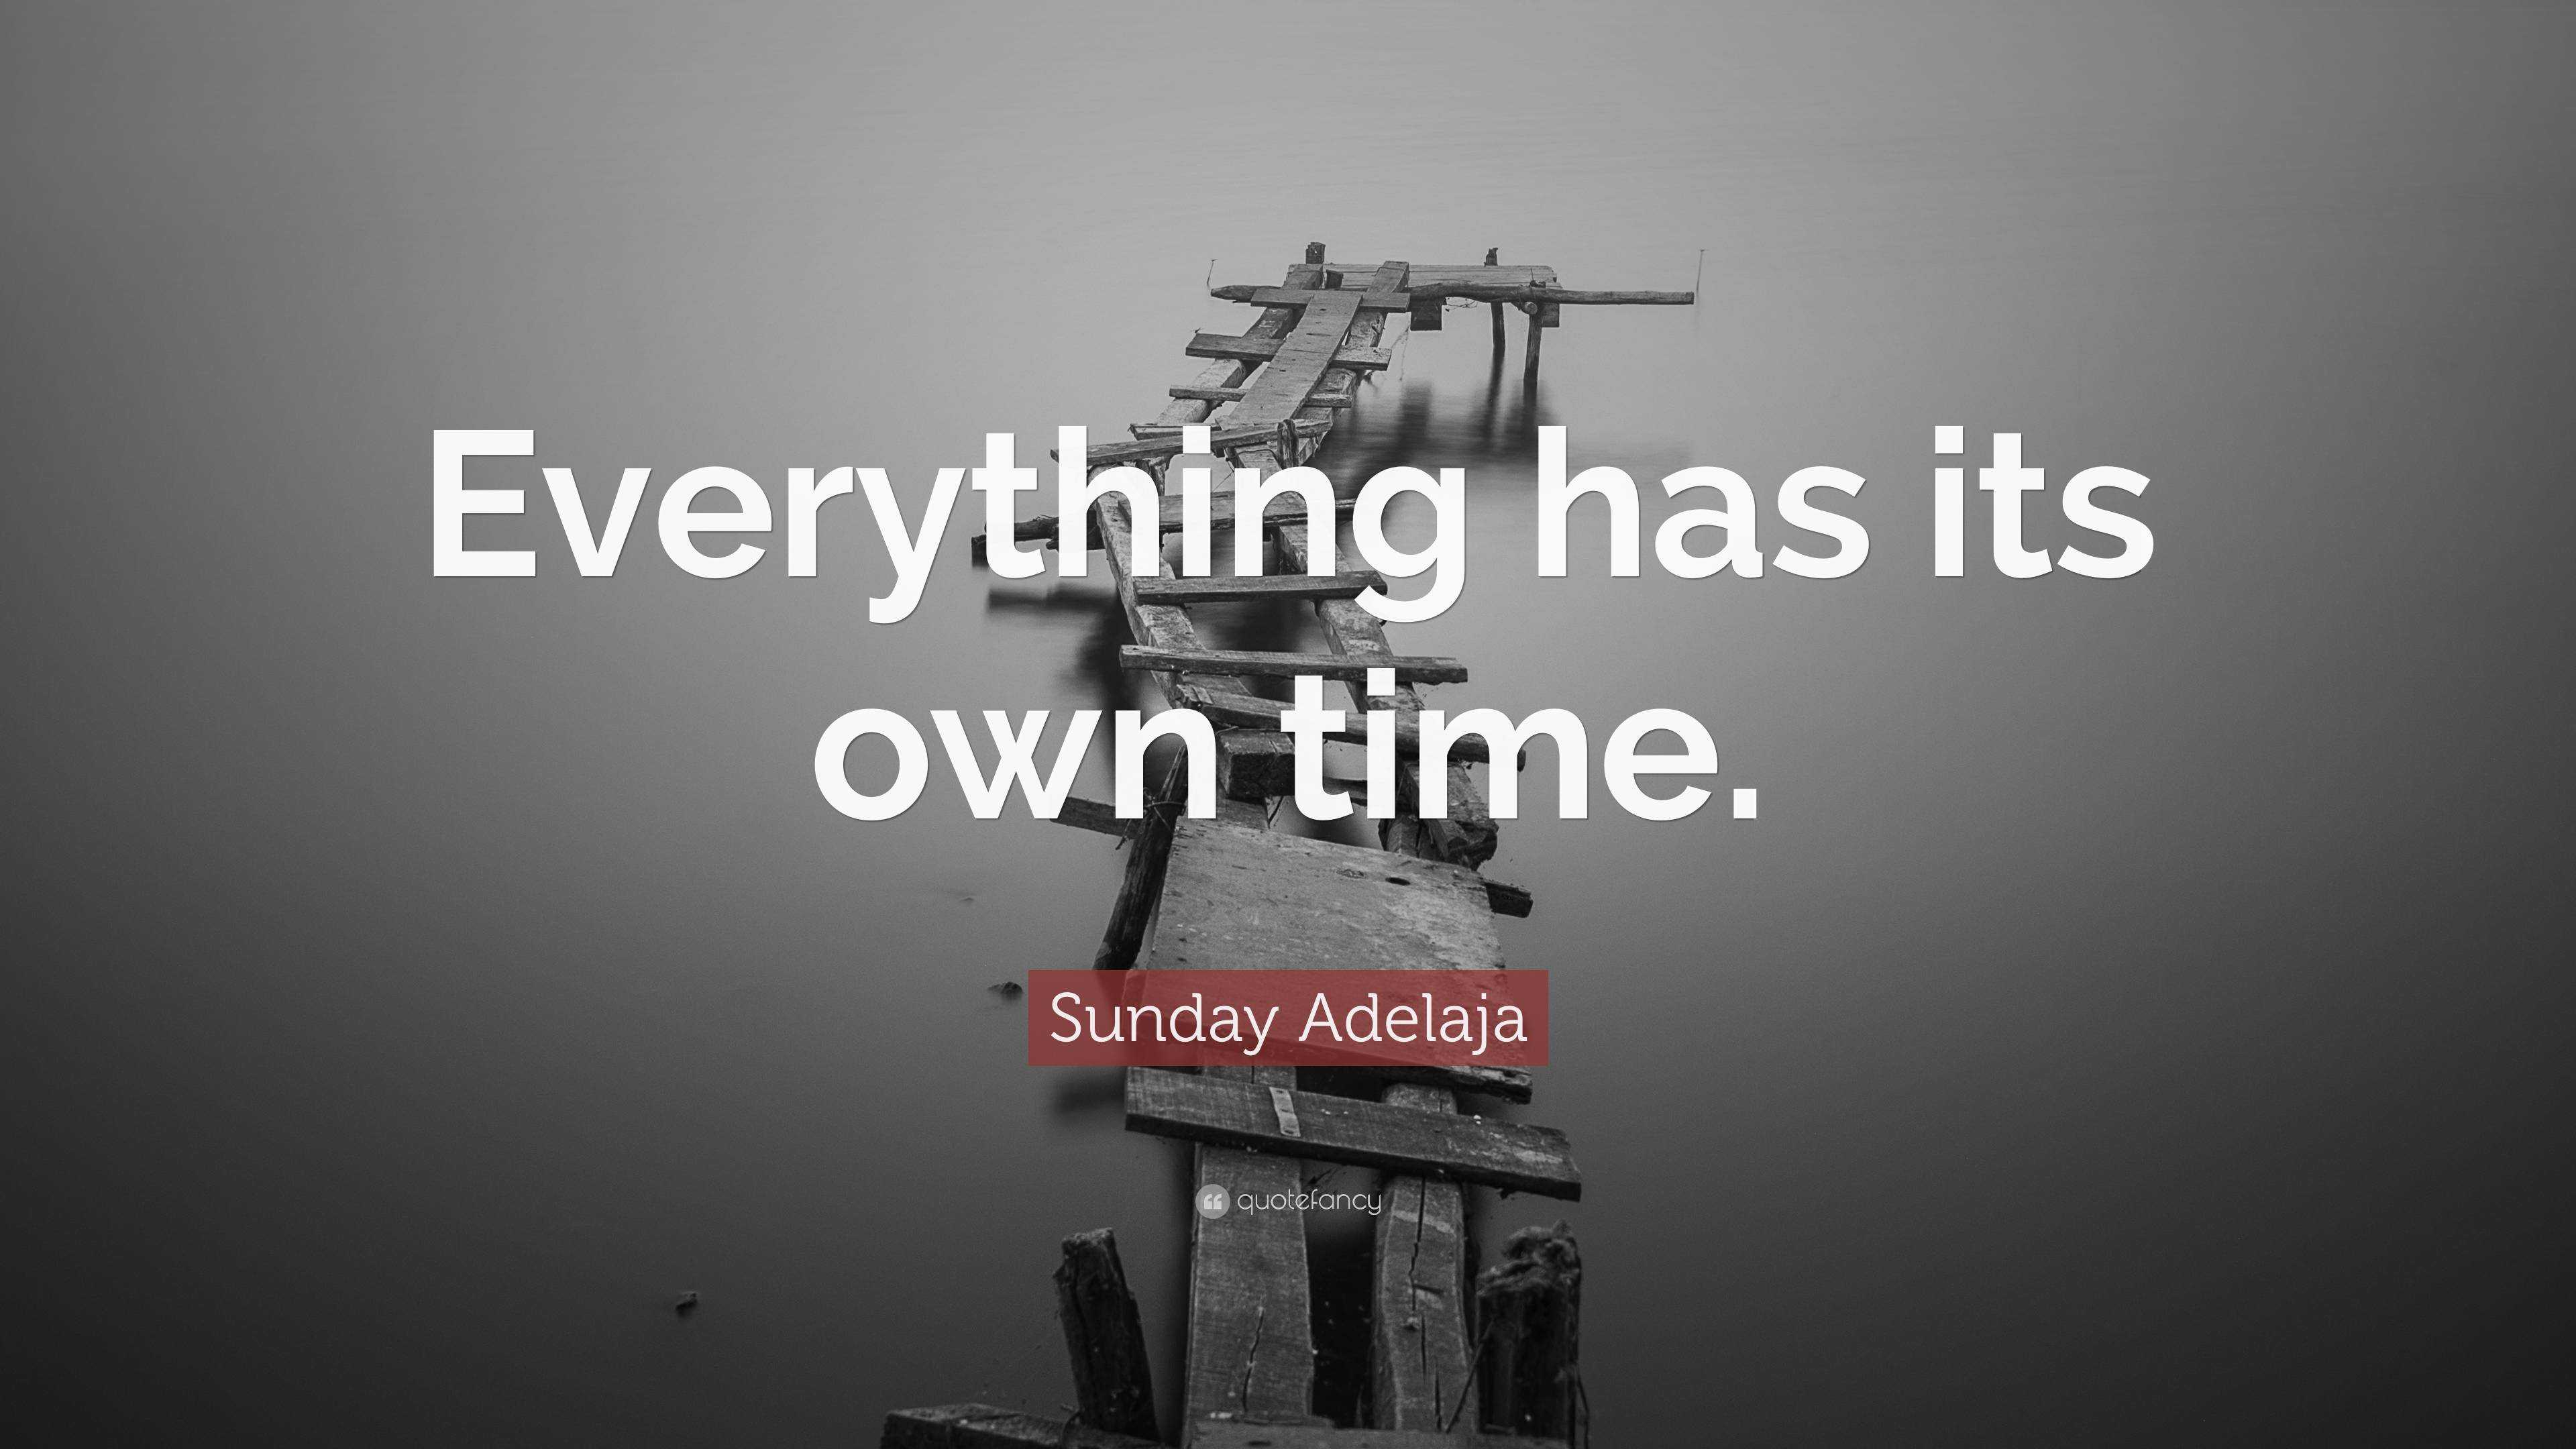 Quote: “Everything has its own